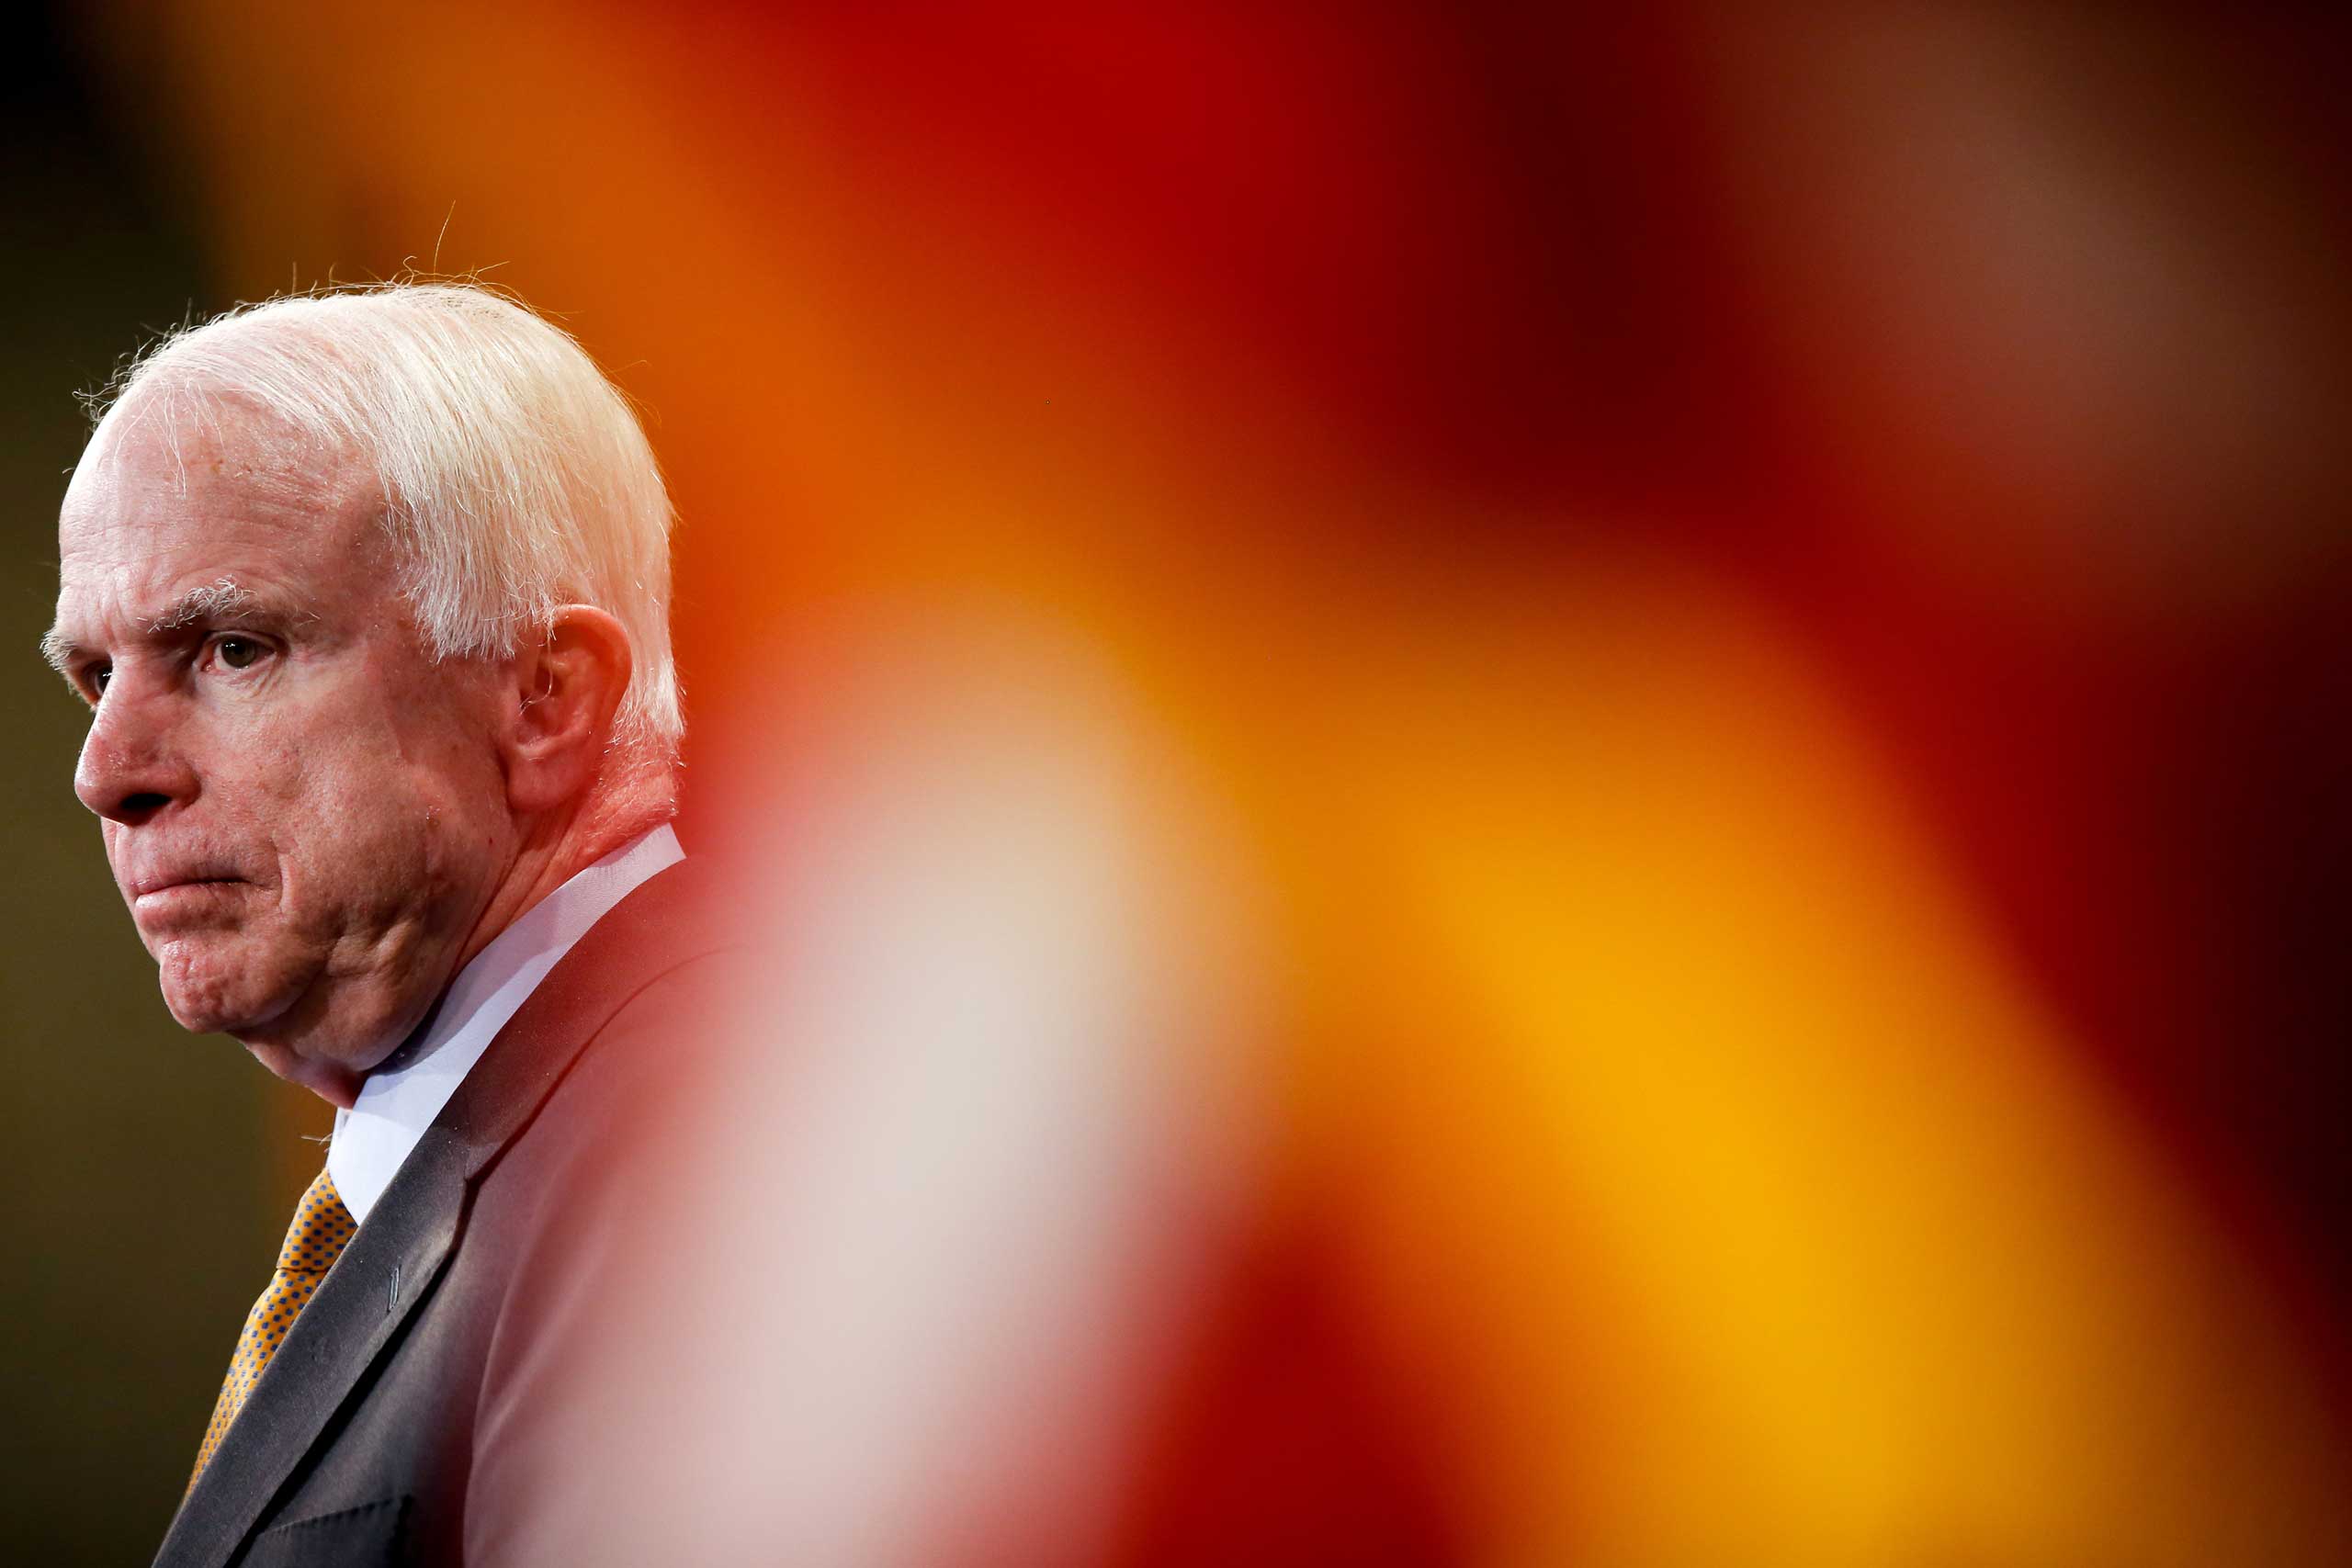 Sen. John McCain, R-Ariz., during a press conference on Capitol Hill in Washington on Thursday, March 26, 2015, on the situation in Yemen. (Andrew Harnik—AP)